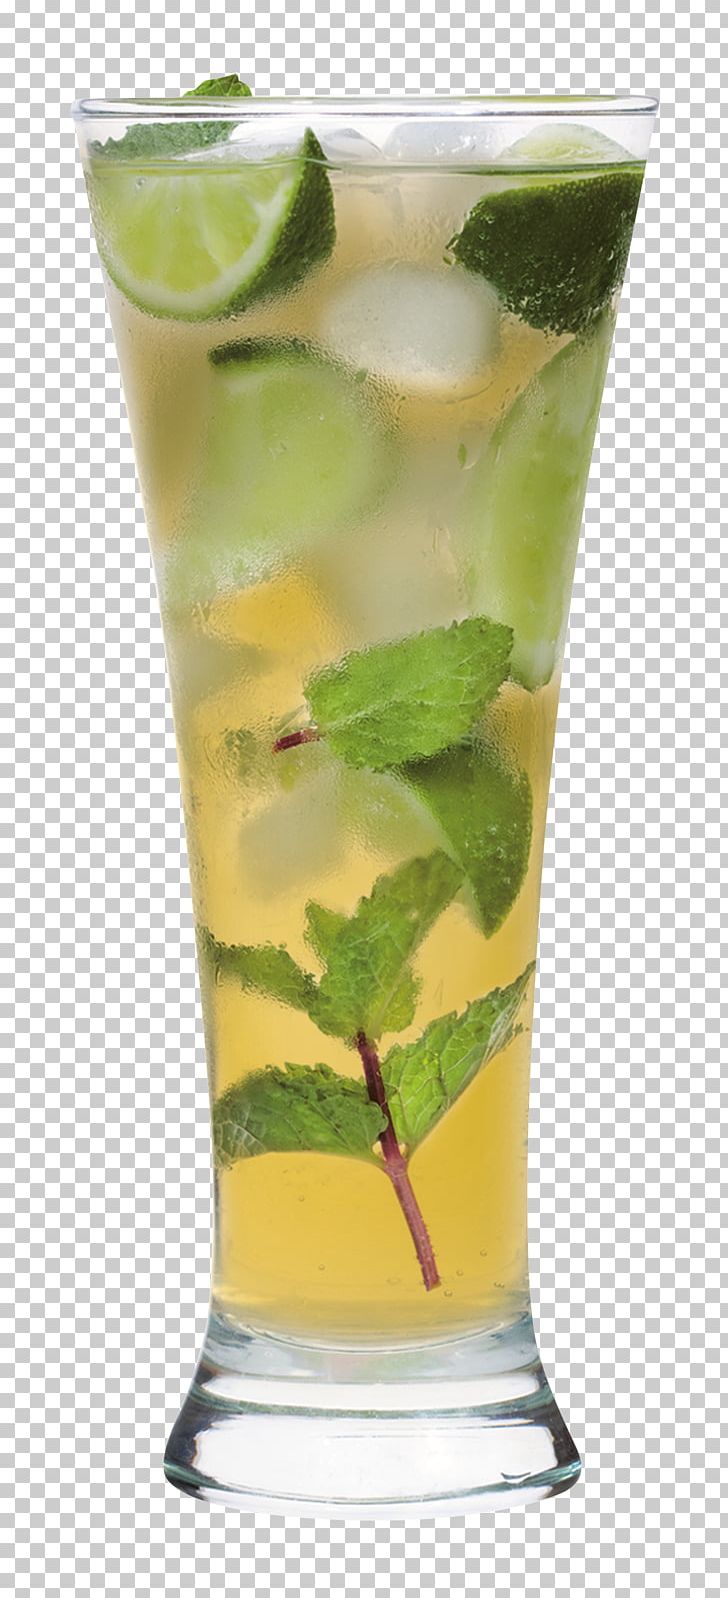 Whiskey Cocktail Mojito Distilled Beverage Fizzy Drinks PNG, Clipart, Agave Nectar, Carbonated Water, Cocktail, Cocktail Garnish, Cuba Libre Free PNG Download